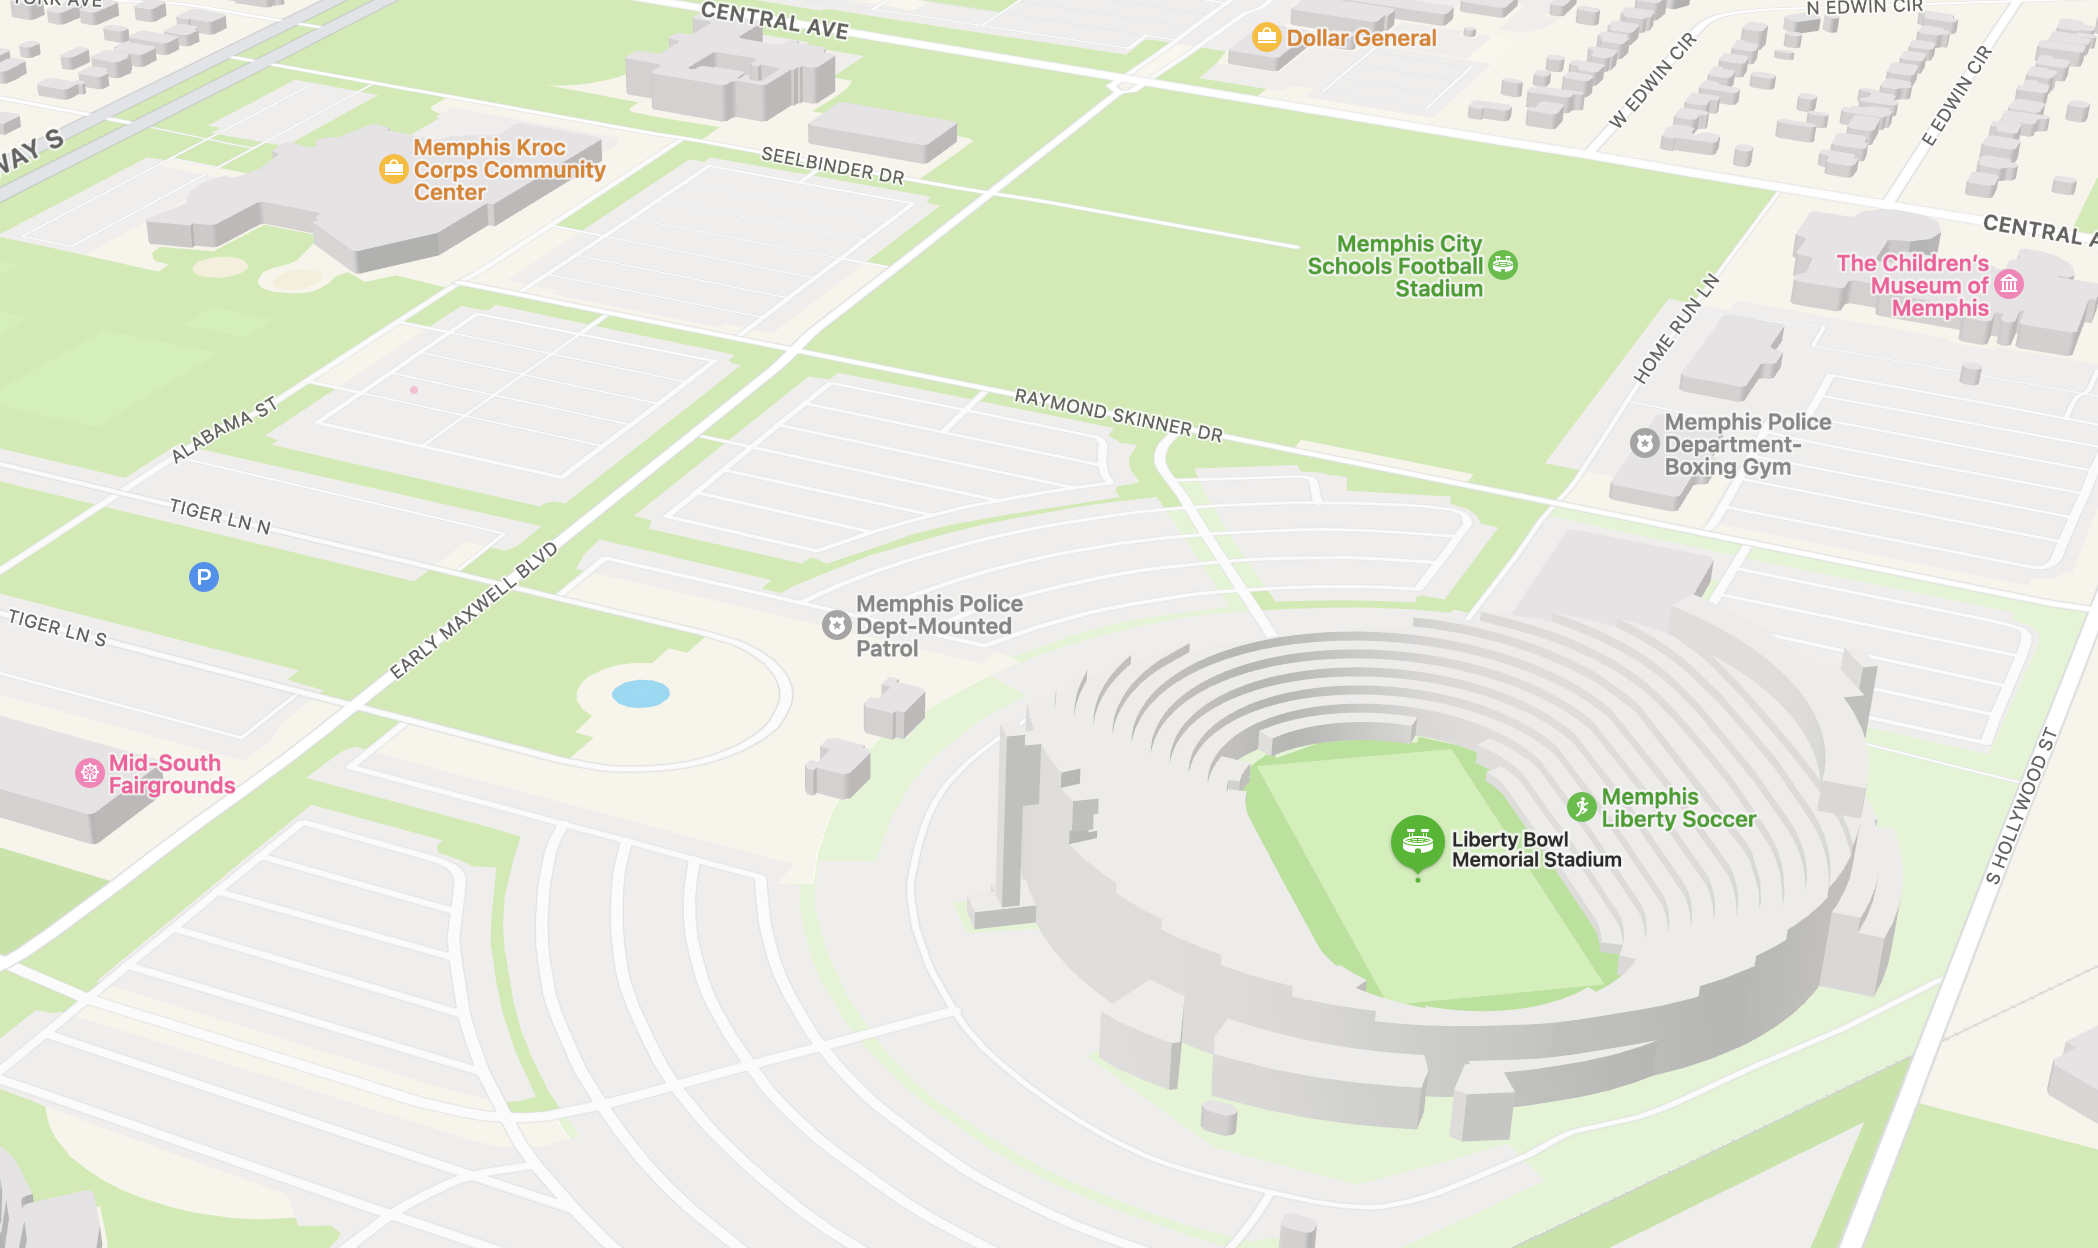 Liberty Bowl in Apple Maps